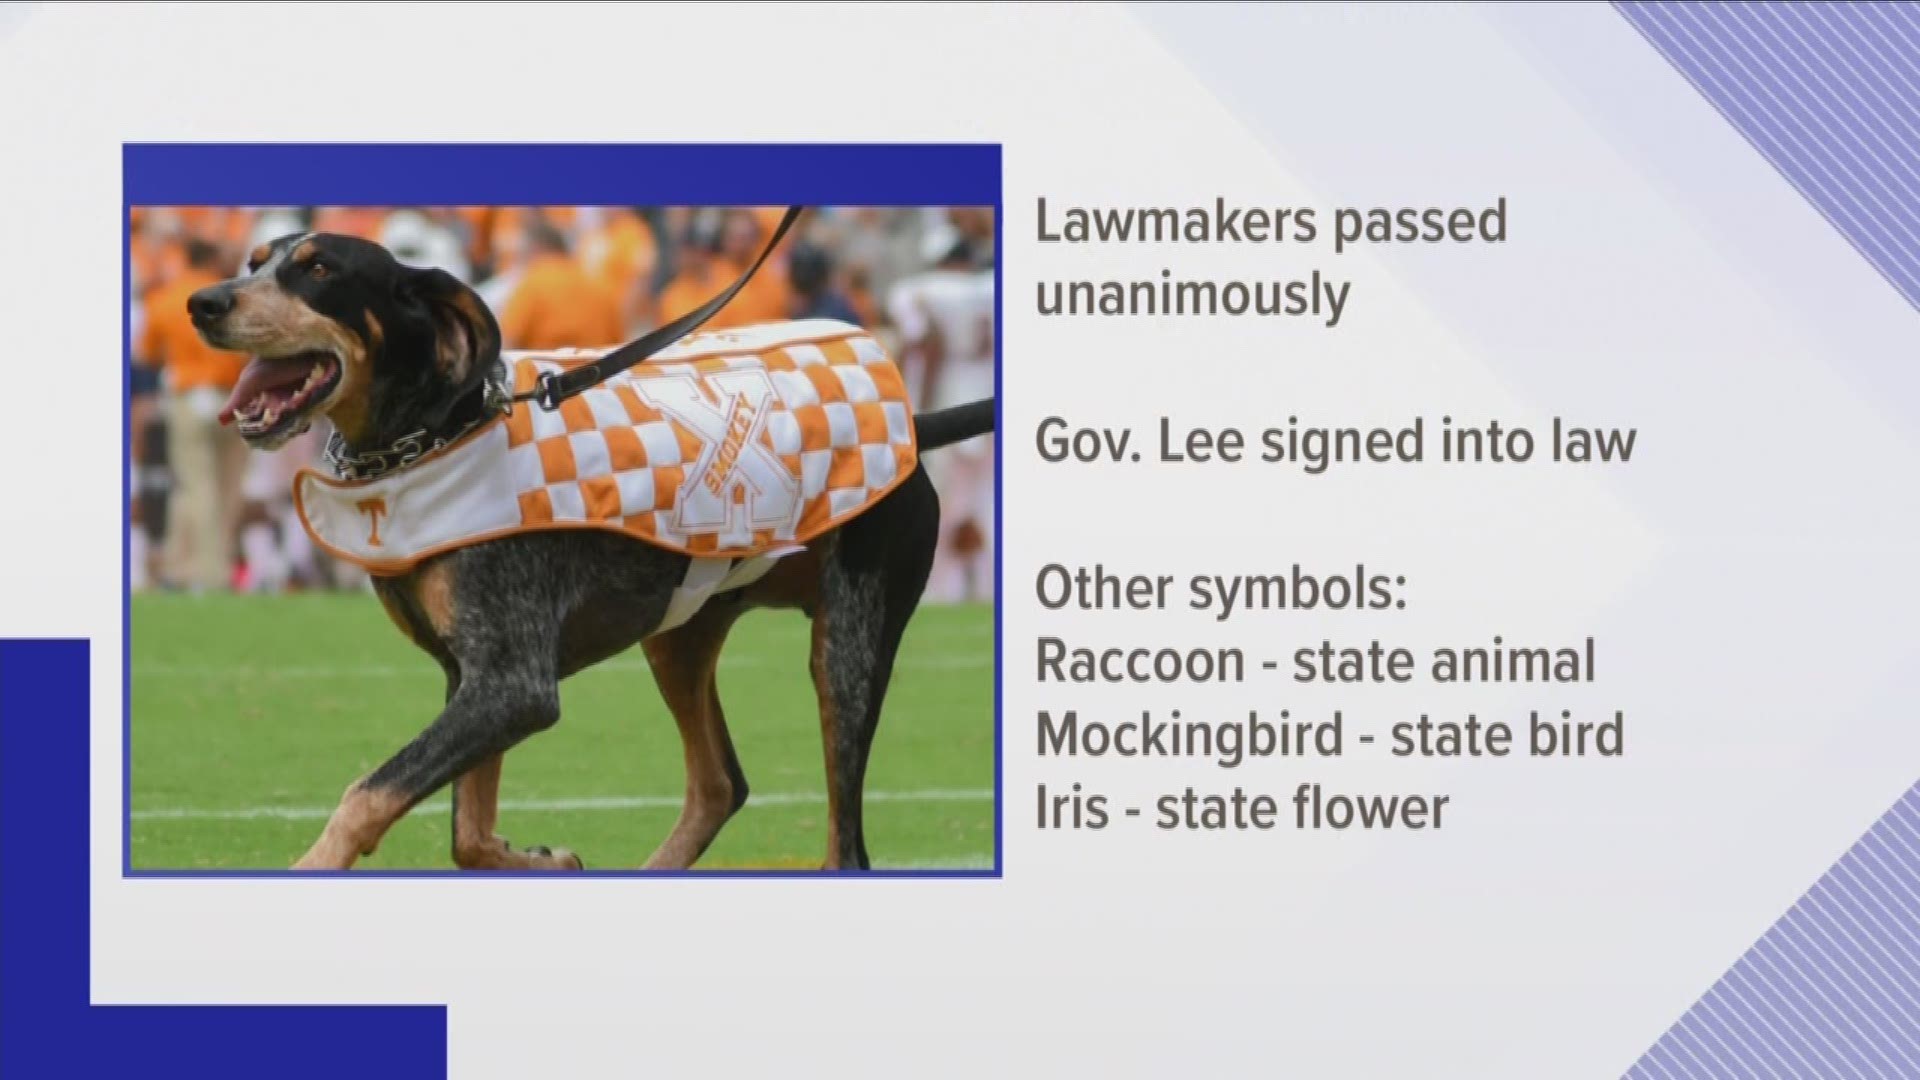 Three cheers for Smokey! The Bluetick Coonhound is now the official state dog of Tennessee.